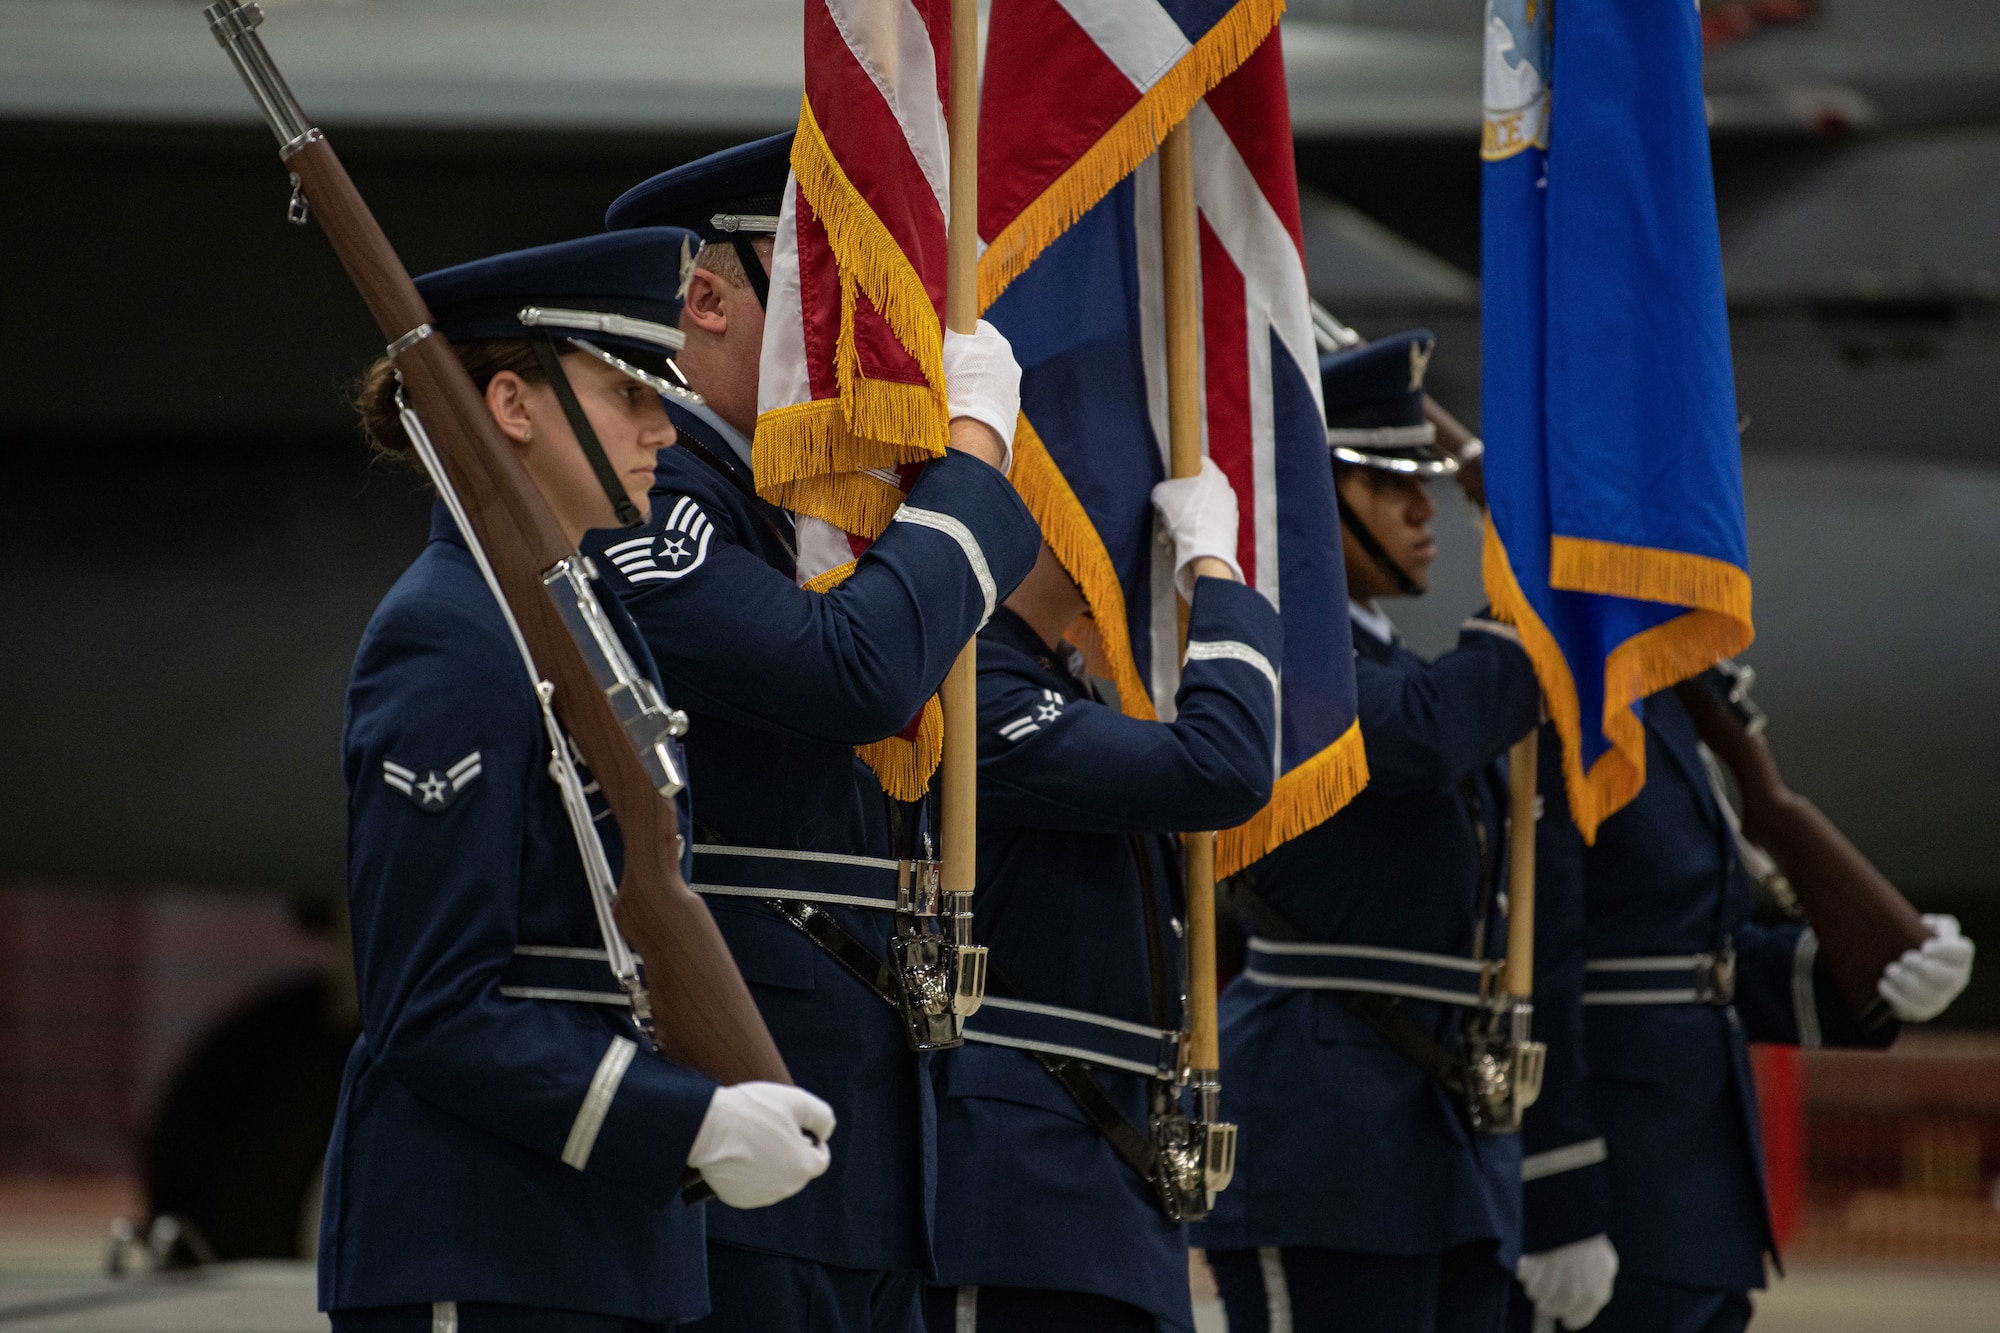 48th Fighter Wing base honor guard stand in formation.